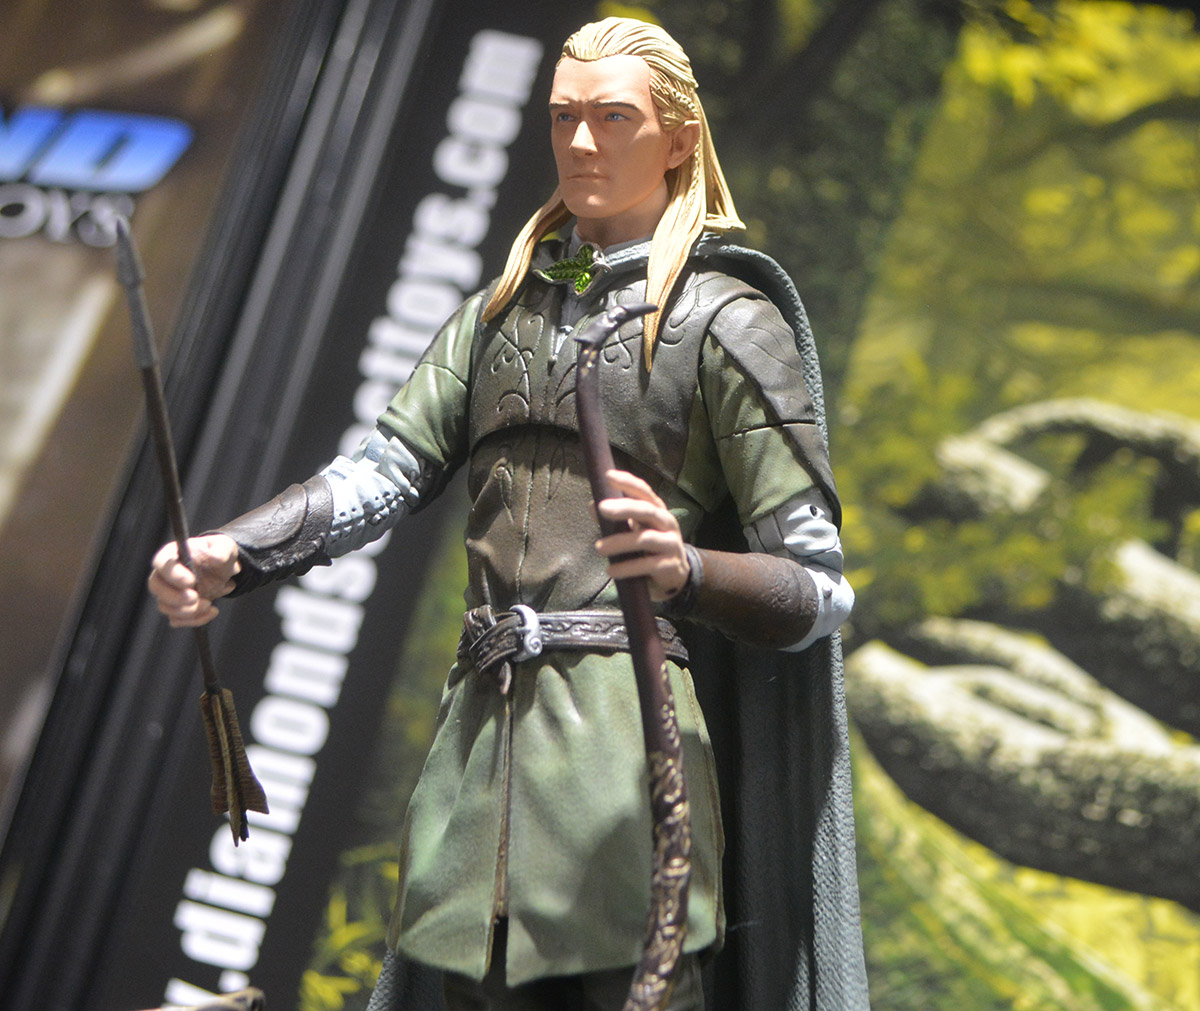 lord of the rings action figure